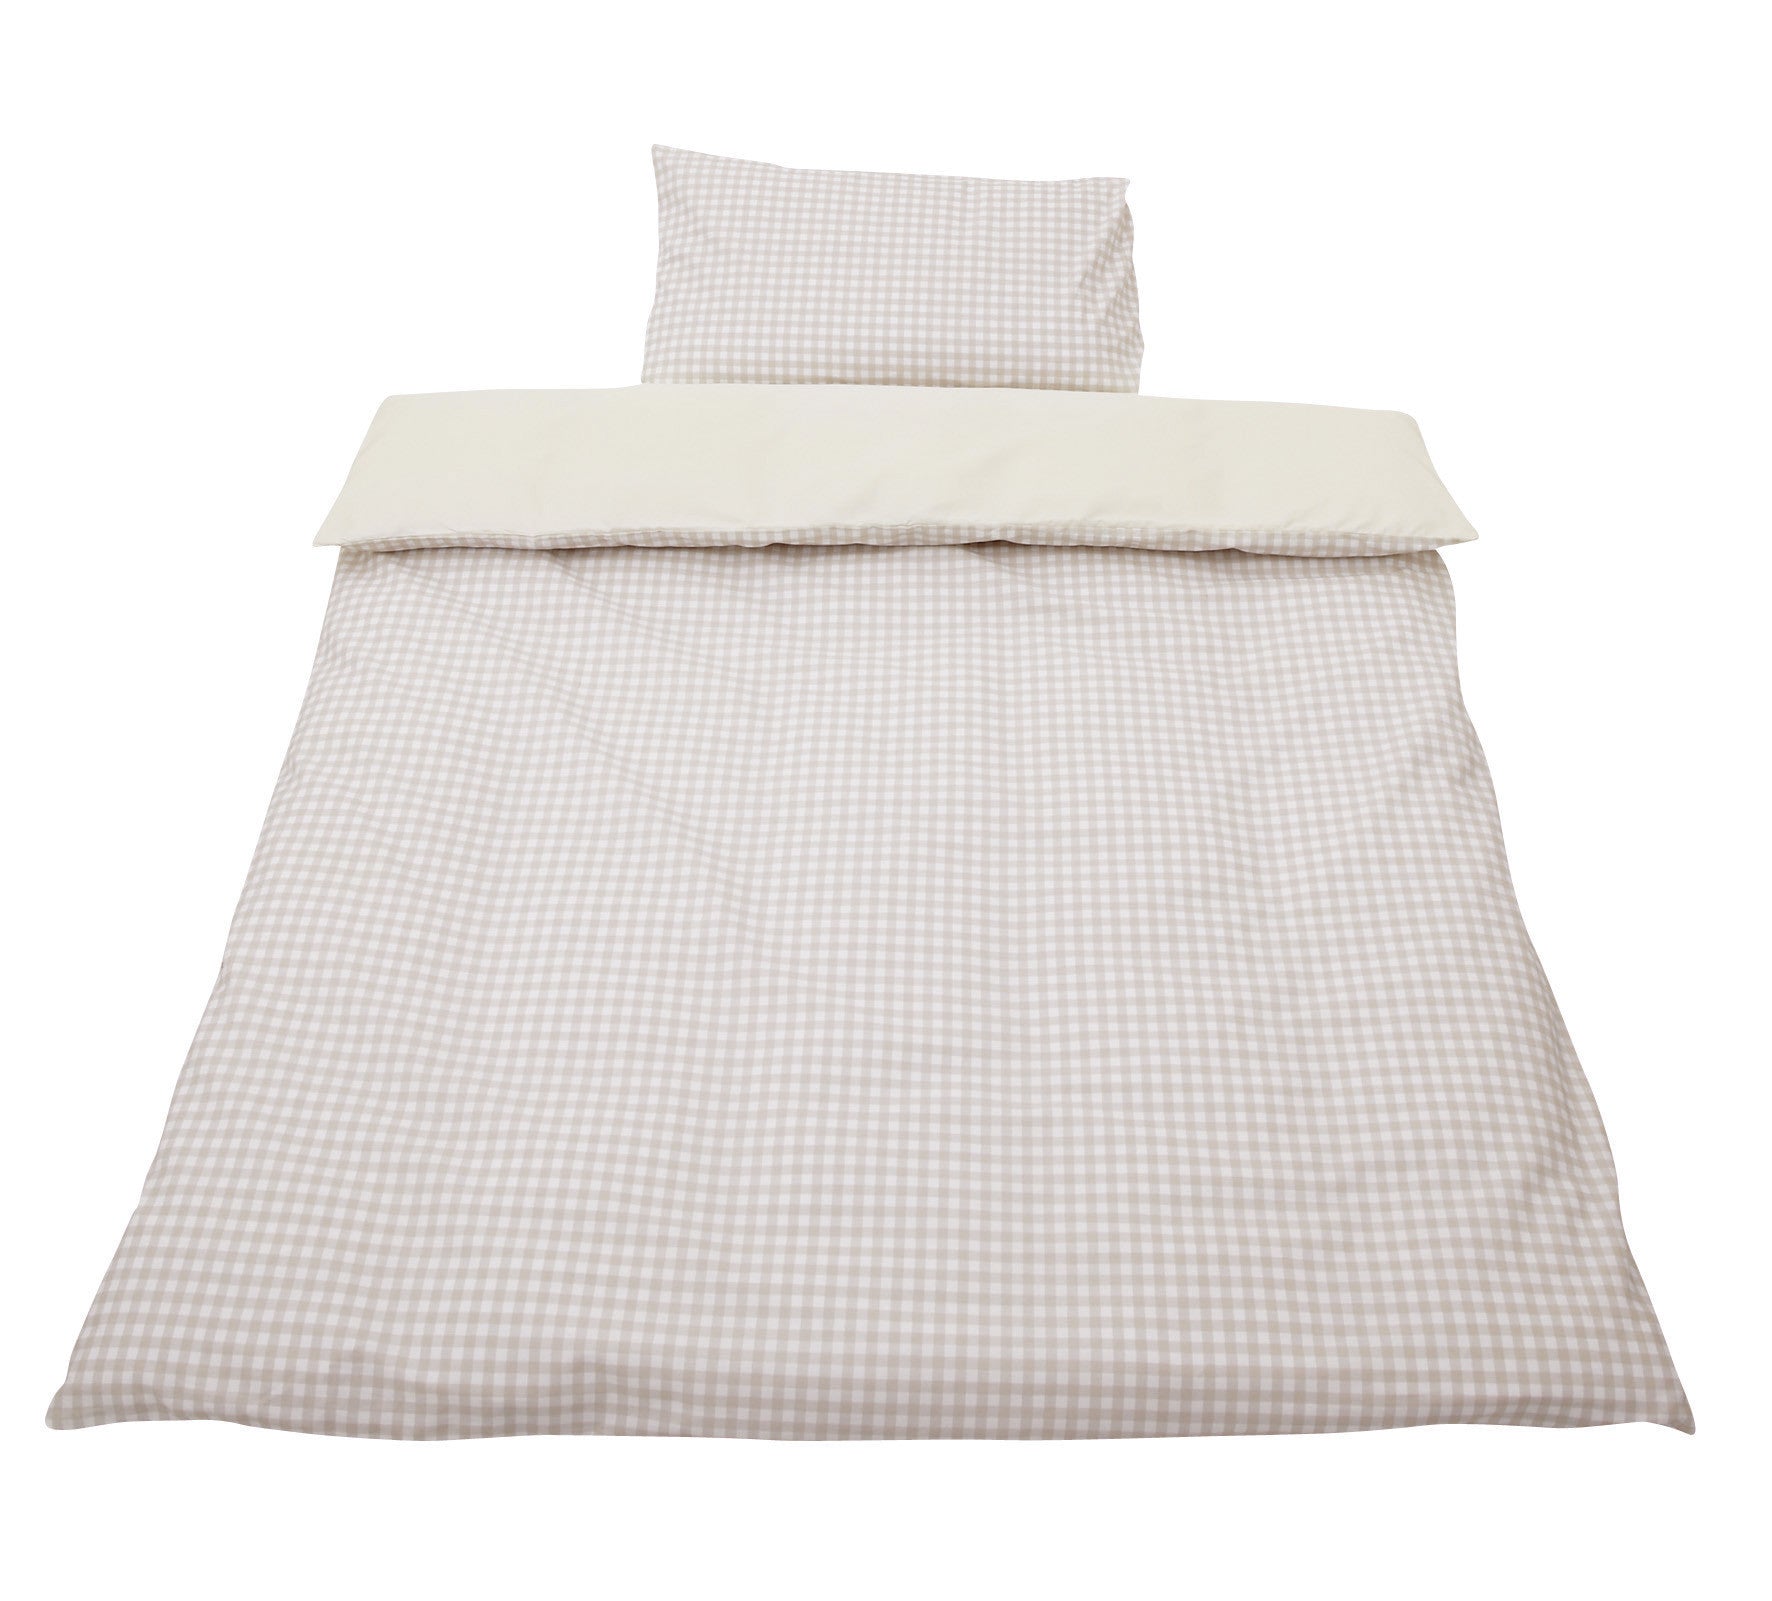 Baroo Beige Gingham Cotbed Duvet Cover And Pillow Case Set